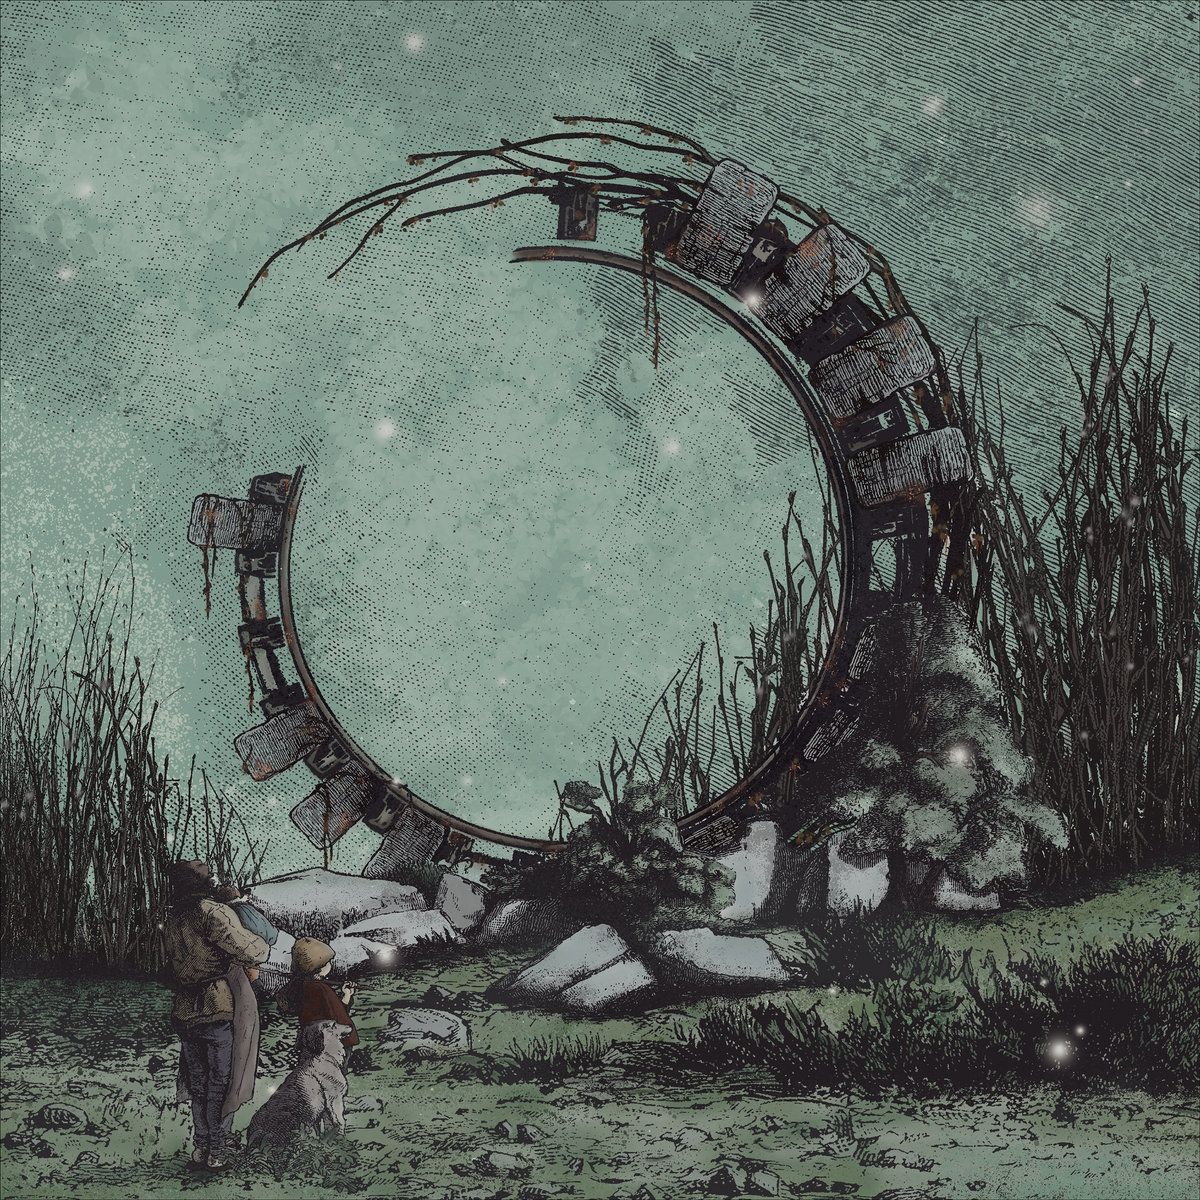 "Illusory Walls" is TWIABP’s strong but inconsistent comeback